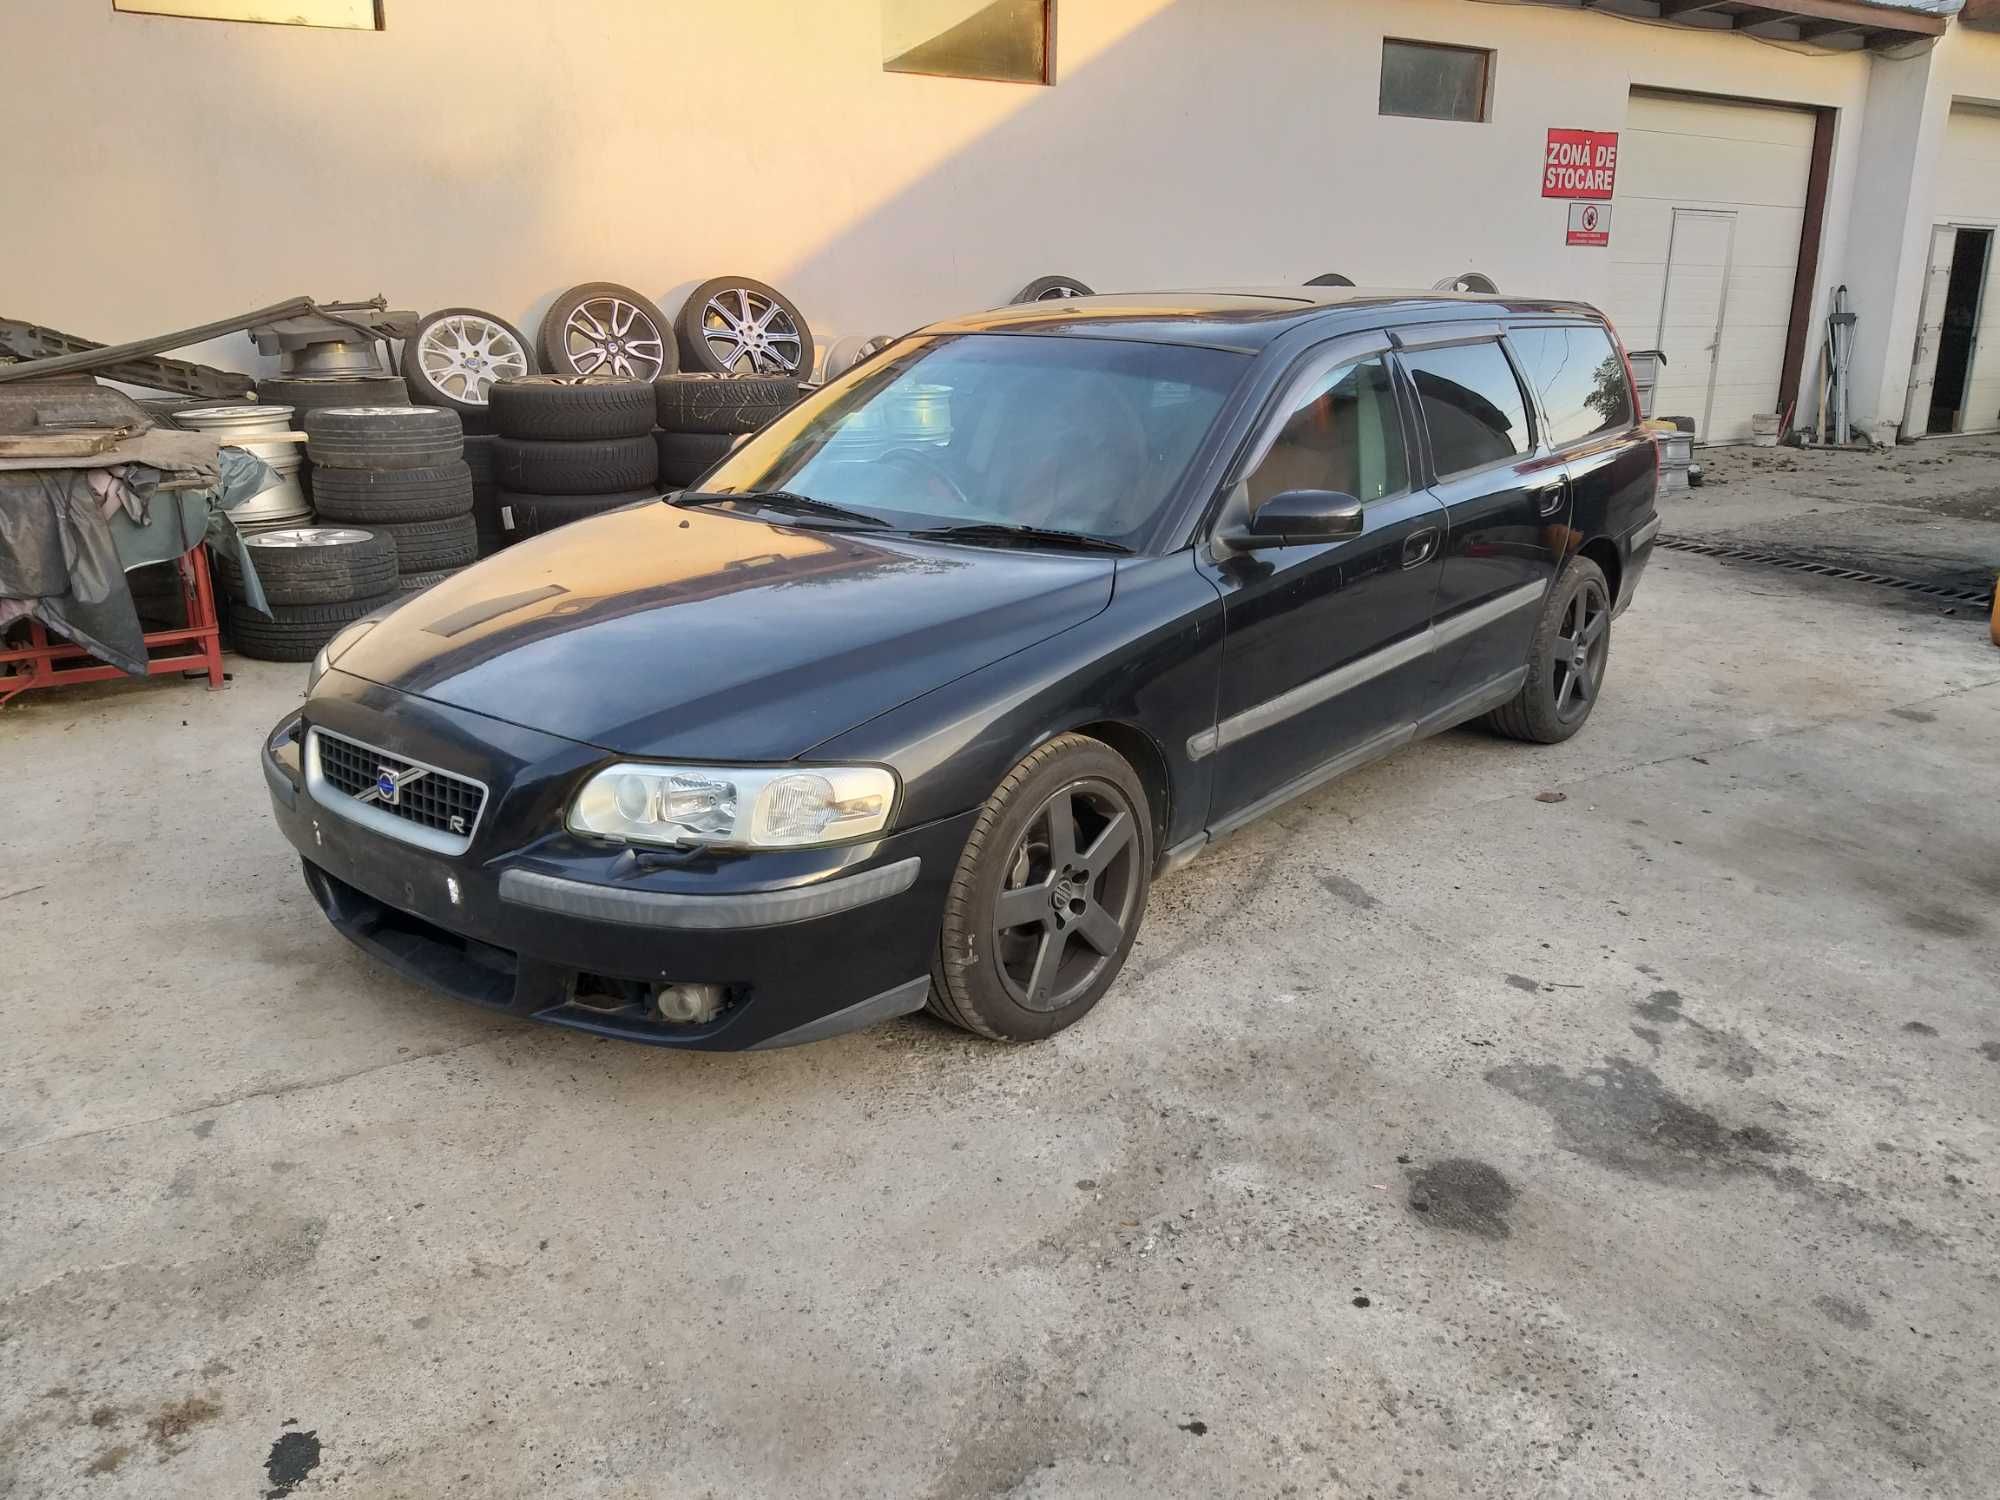 Piese Second Volvo S60 V70 R 2.5 Turbo Awd 299 Cai An 2004